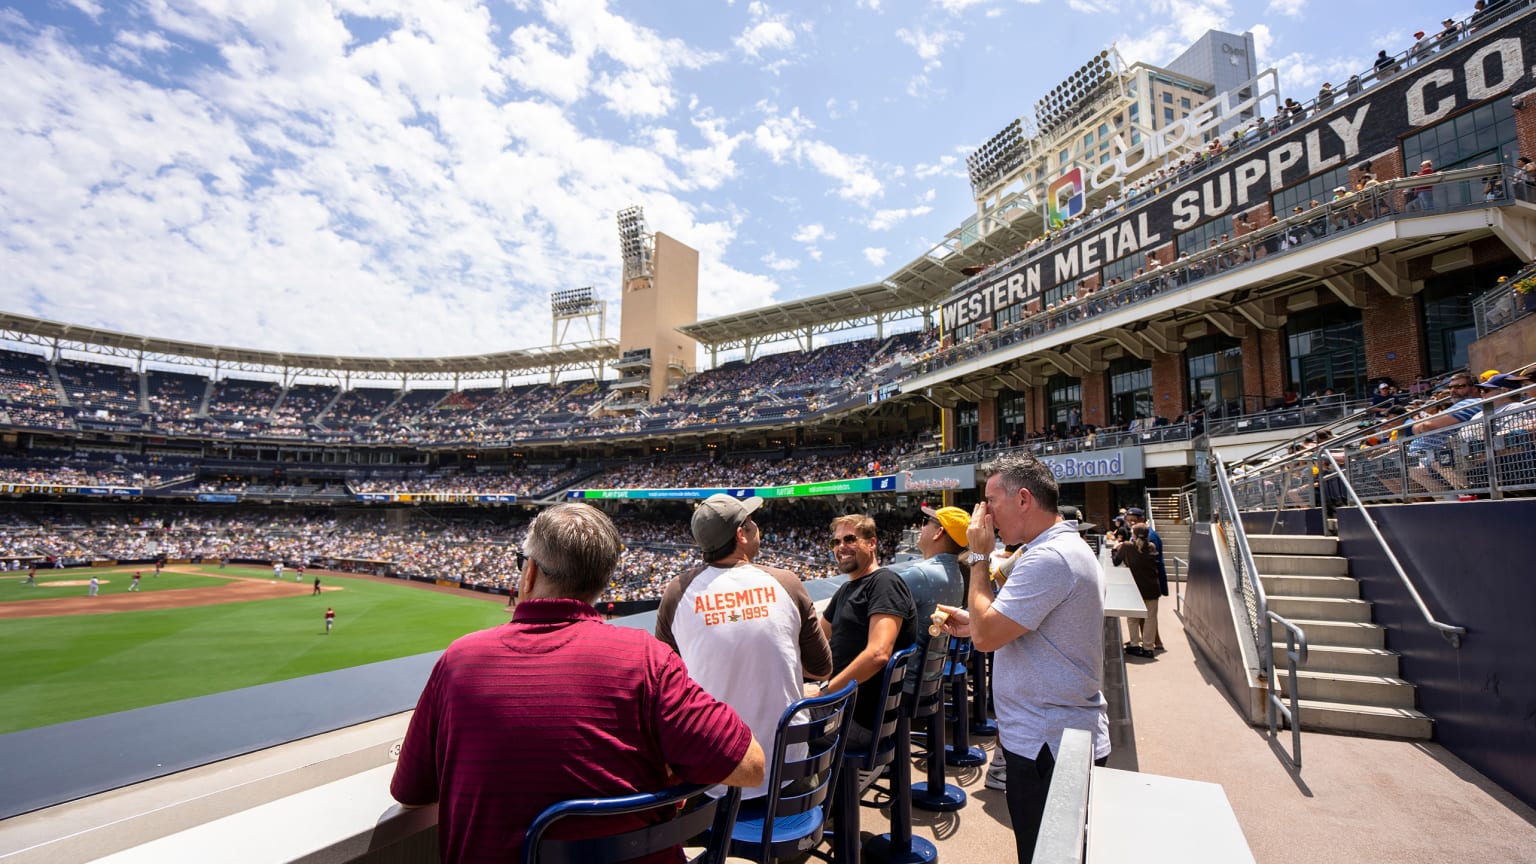 Holiday Bowl: How Petco Park landed the game, and what you should